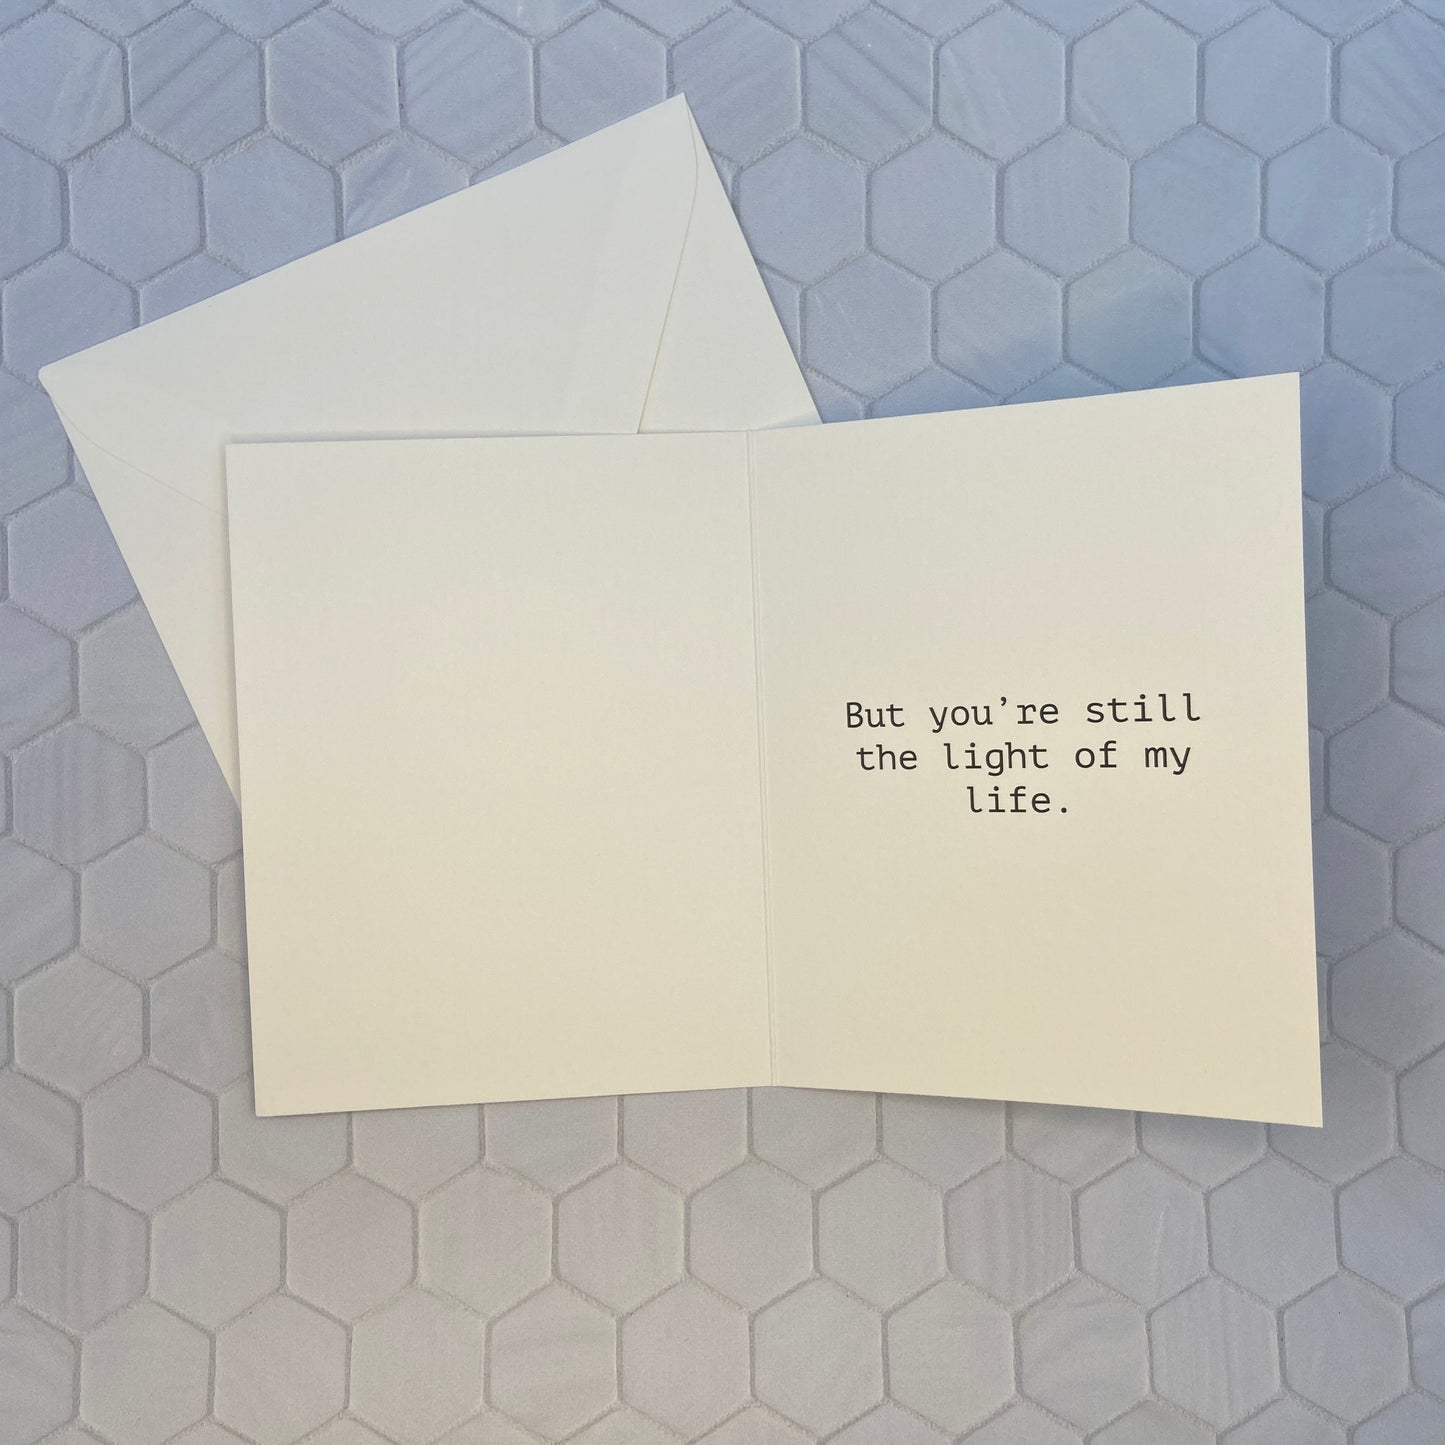 Romantic card for your significant other or roommate